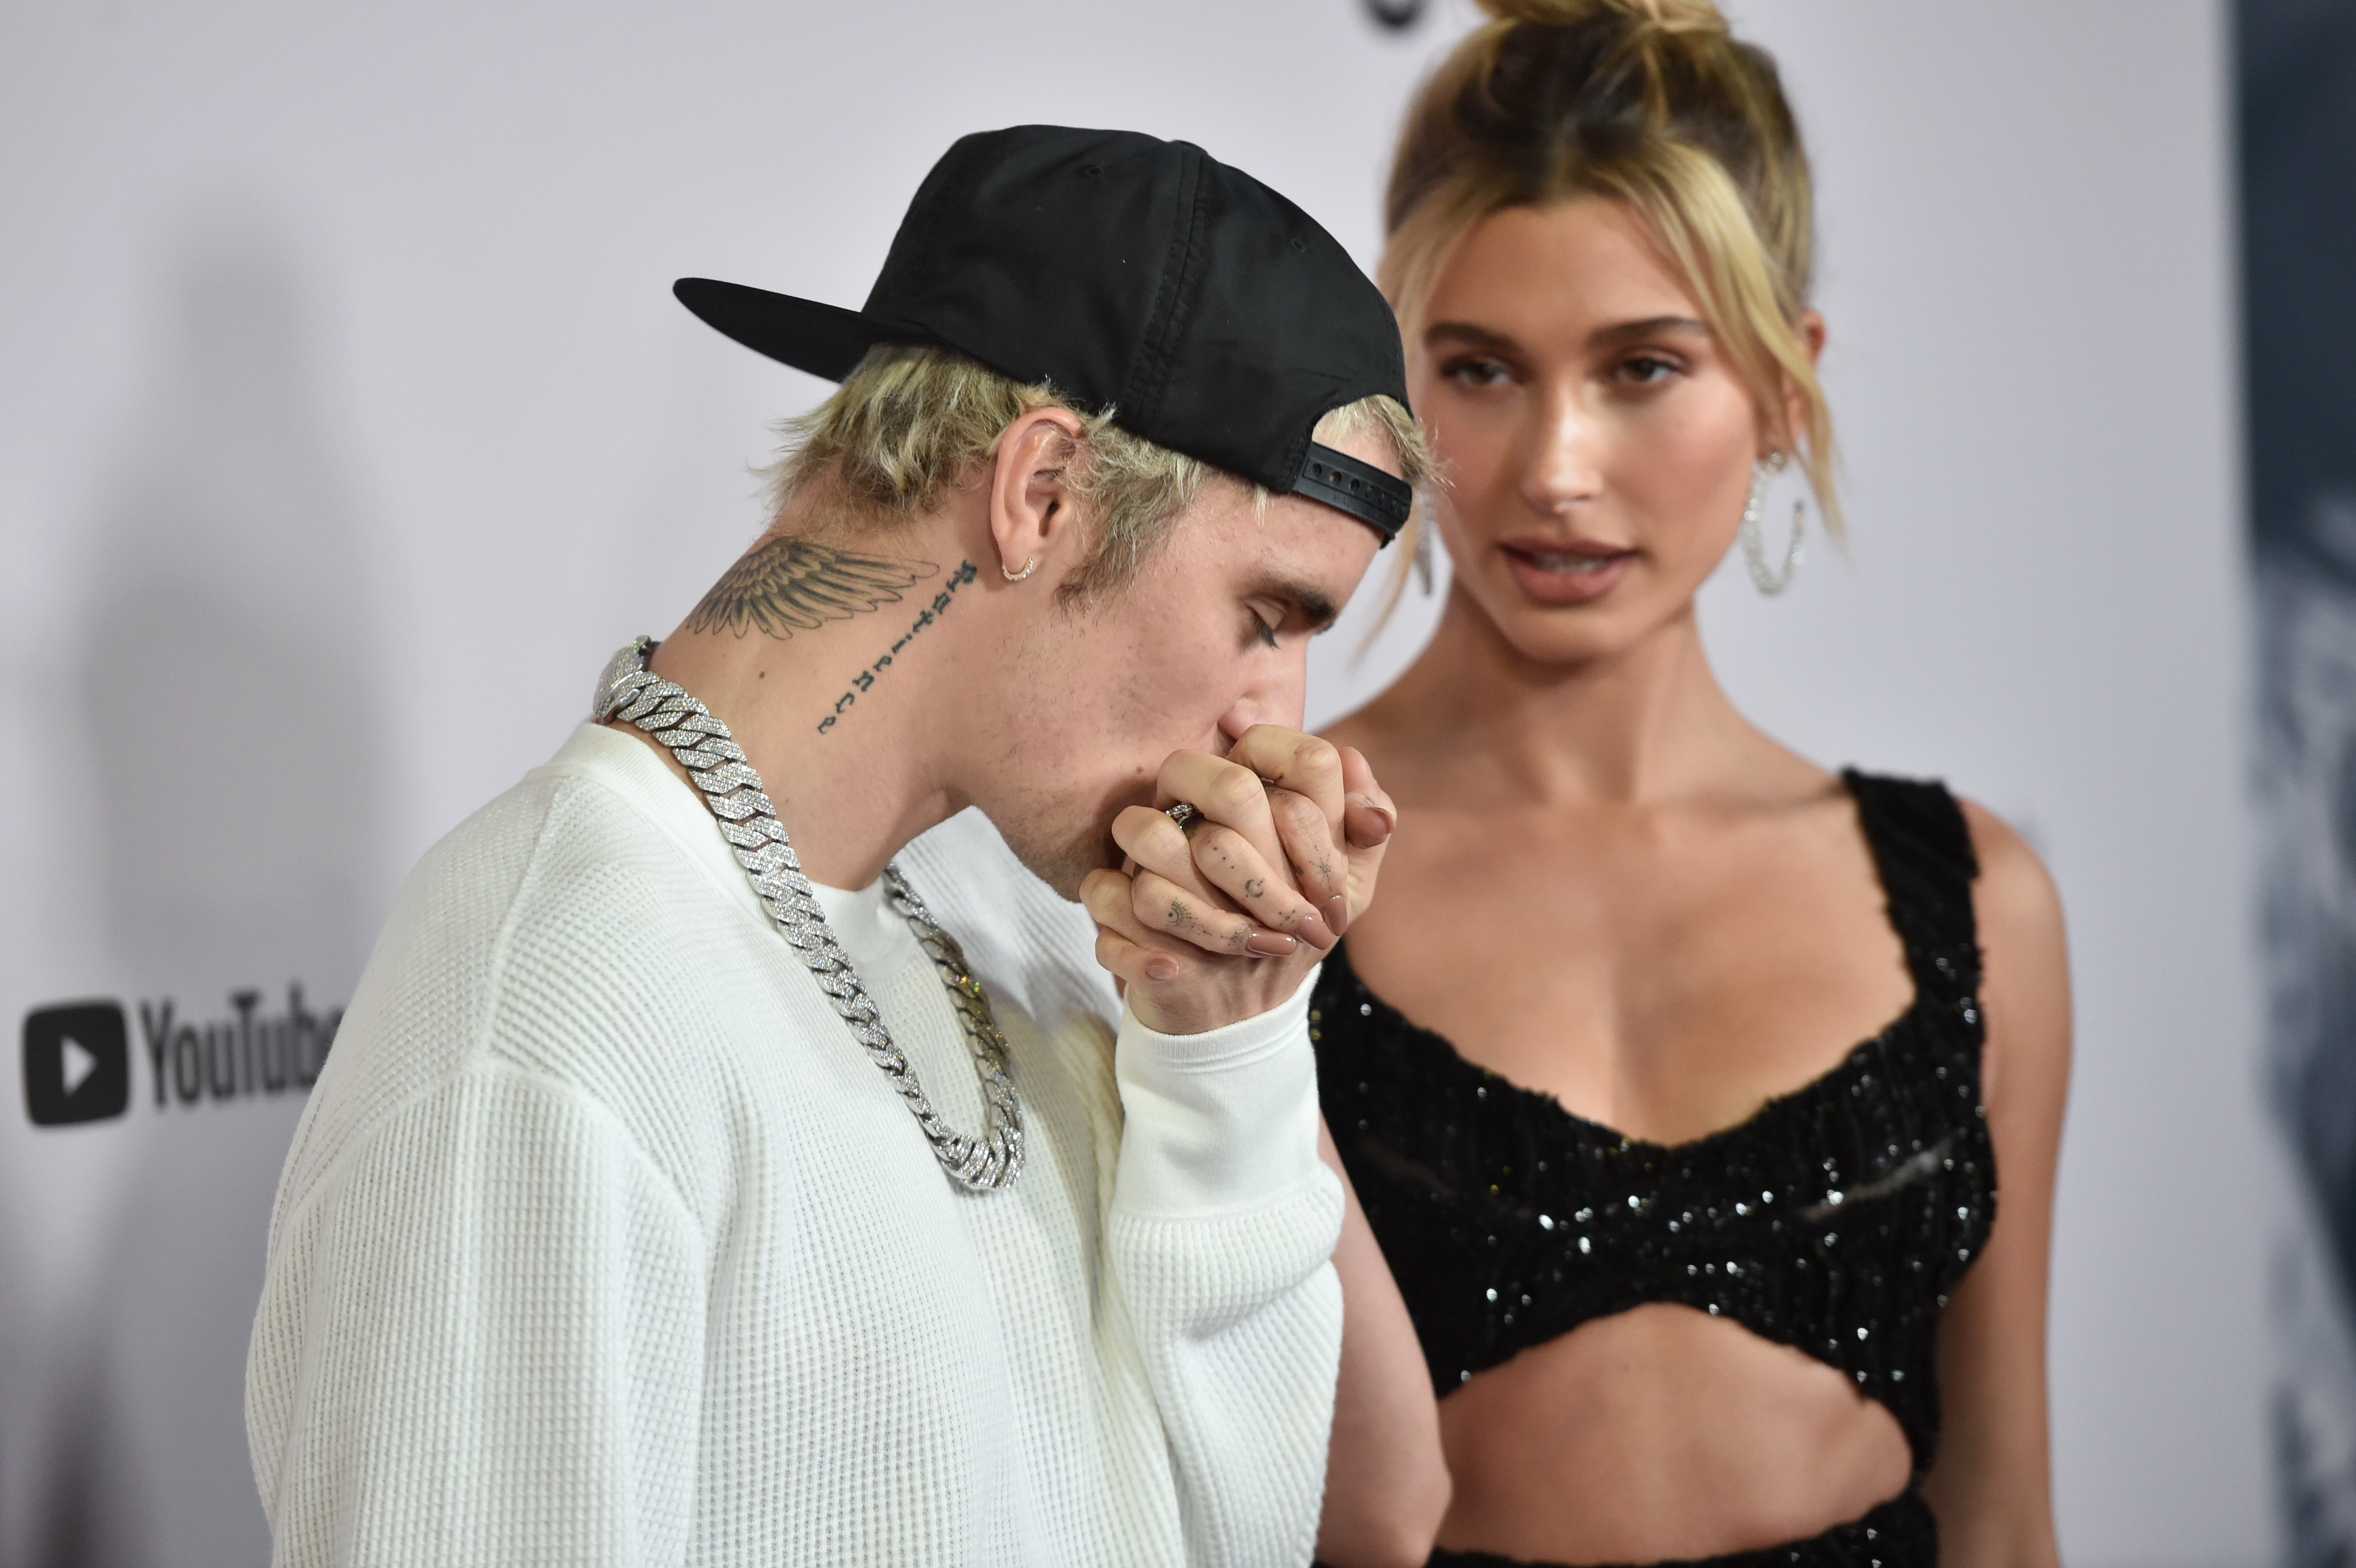 Justin Bieber and Hailey Baldwin on January 27, 2020 in Los Angeles, California | Source: Getty Images